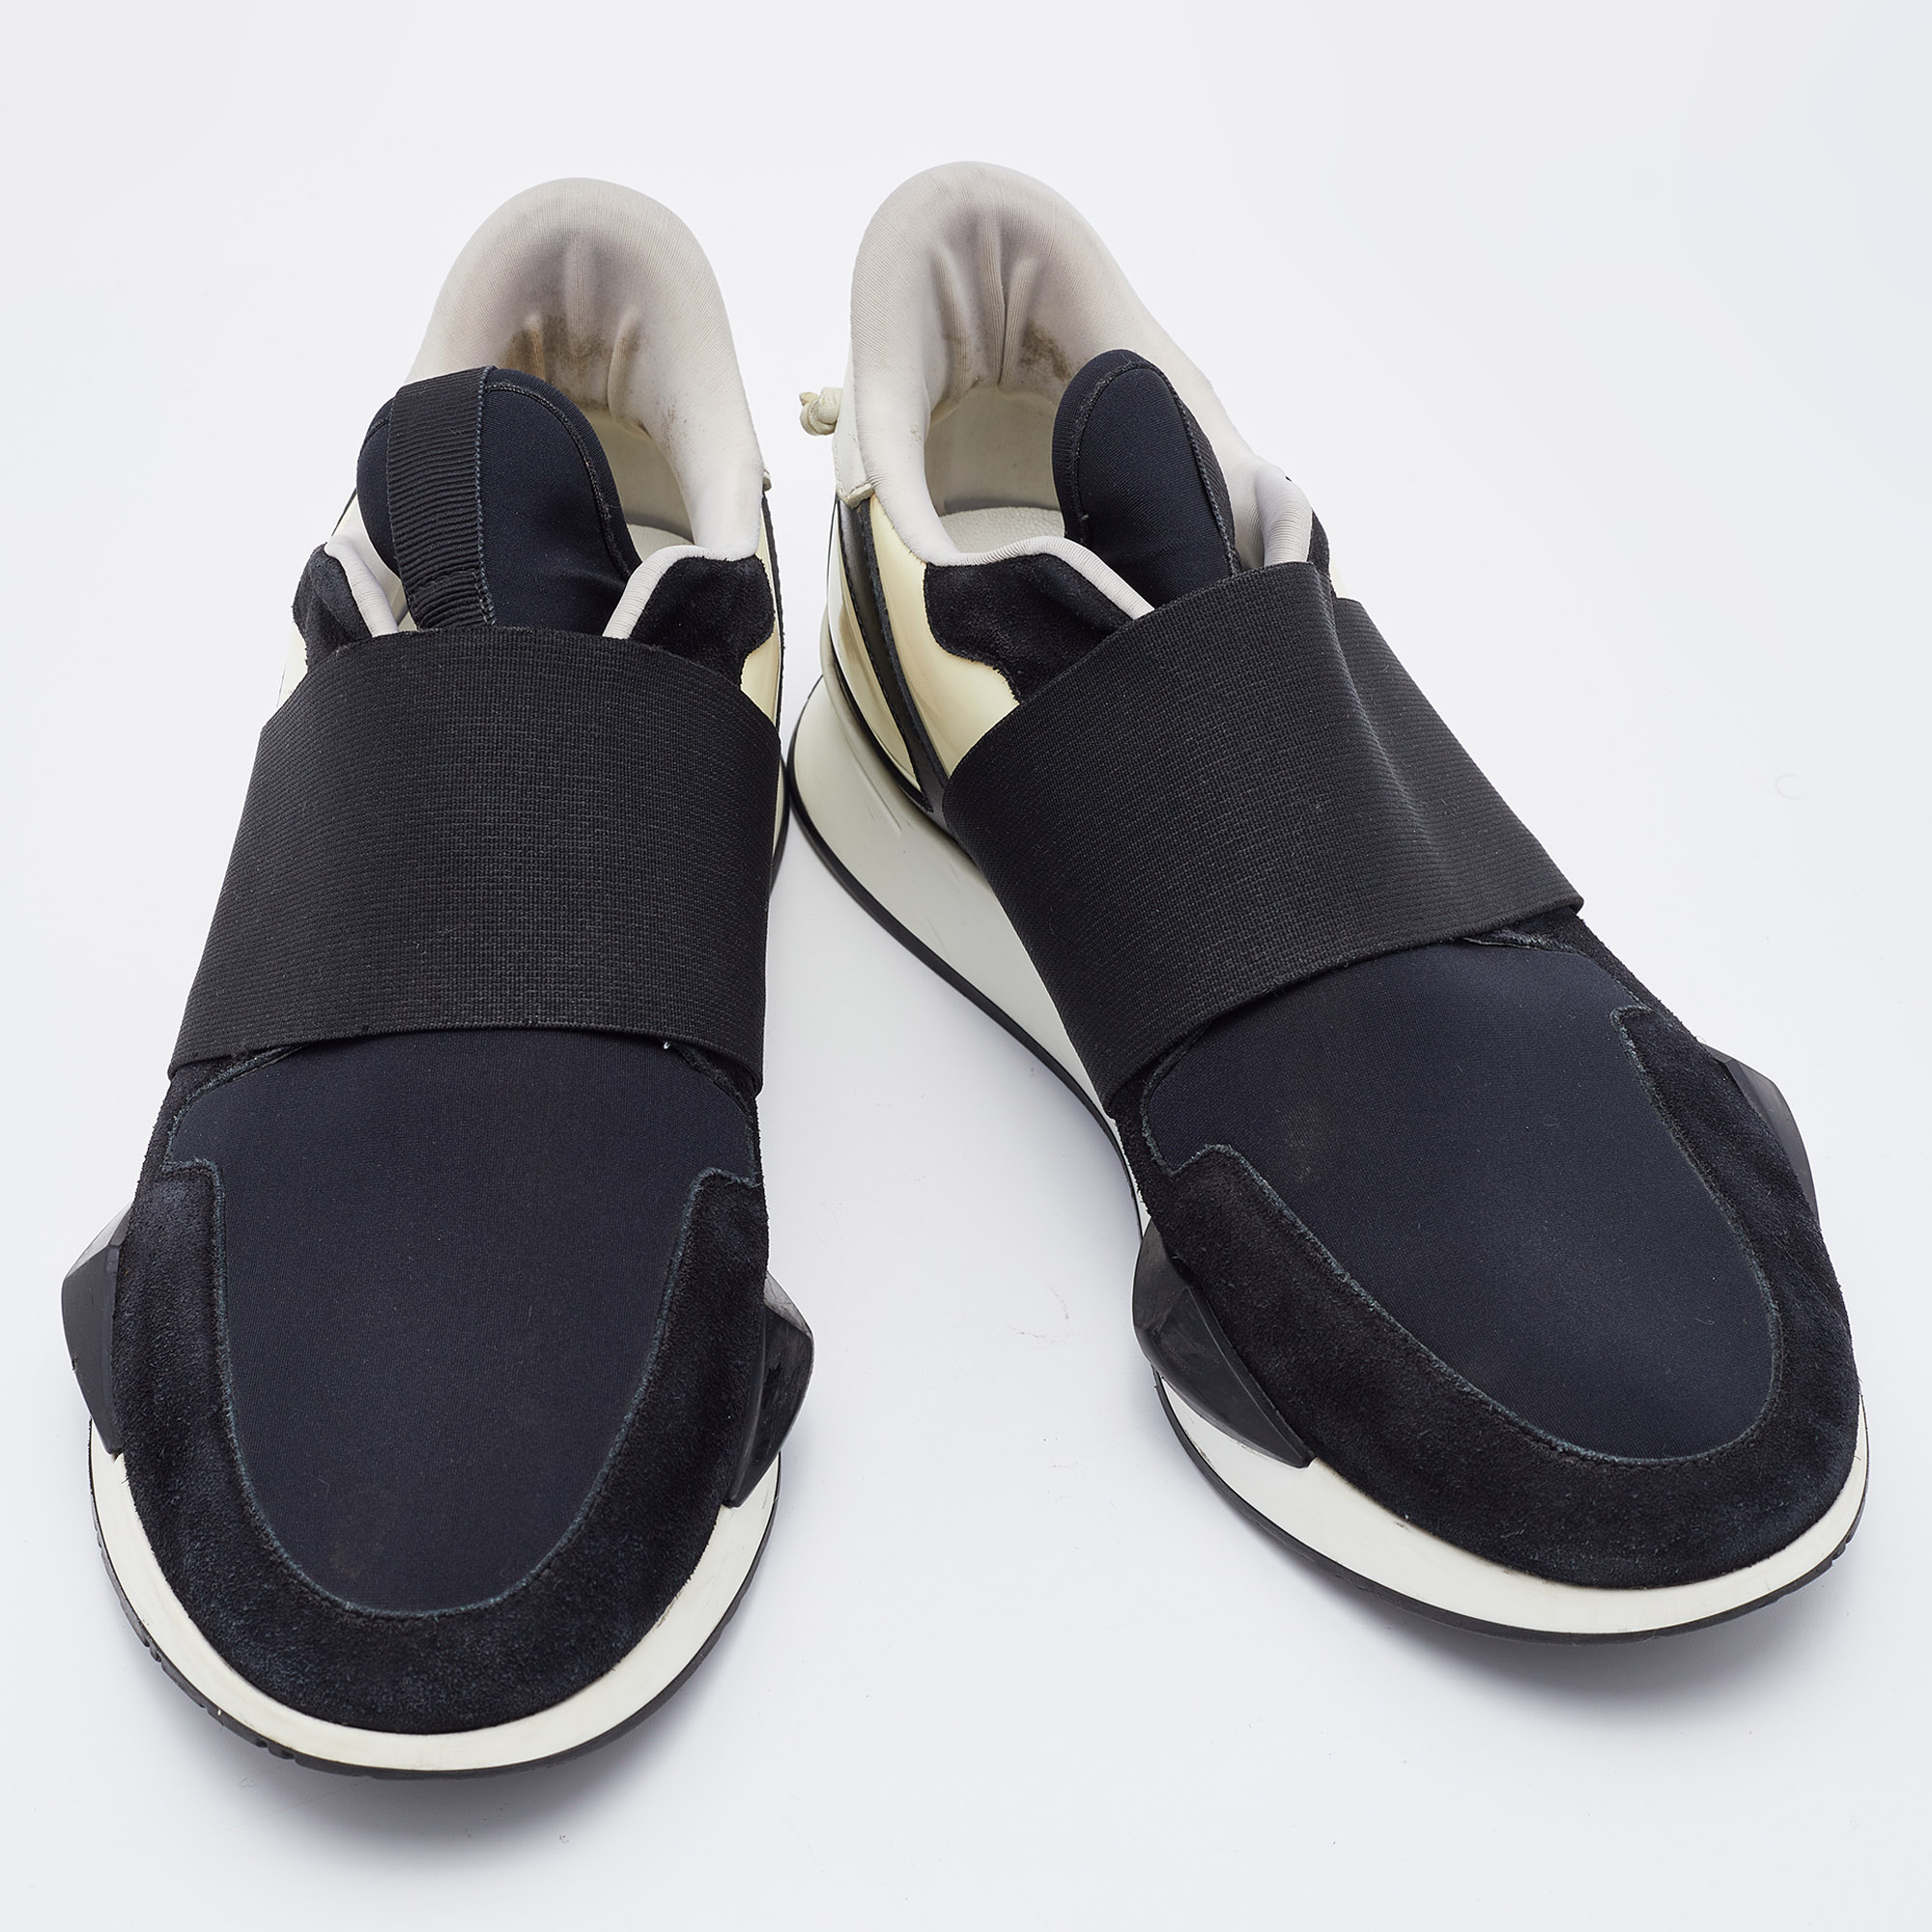 Givenchy Black Neoprene And Suede Runner Elastic Sneakers Size 38